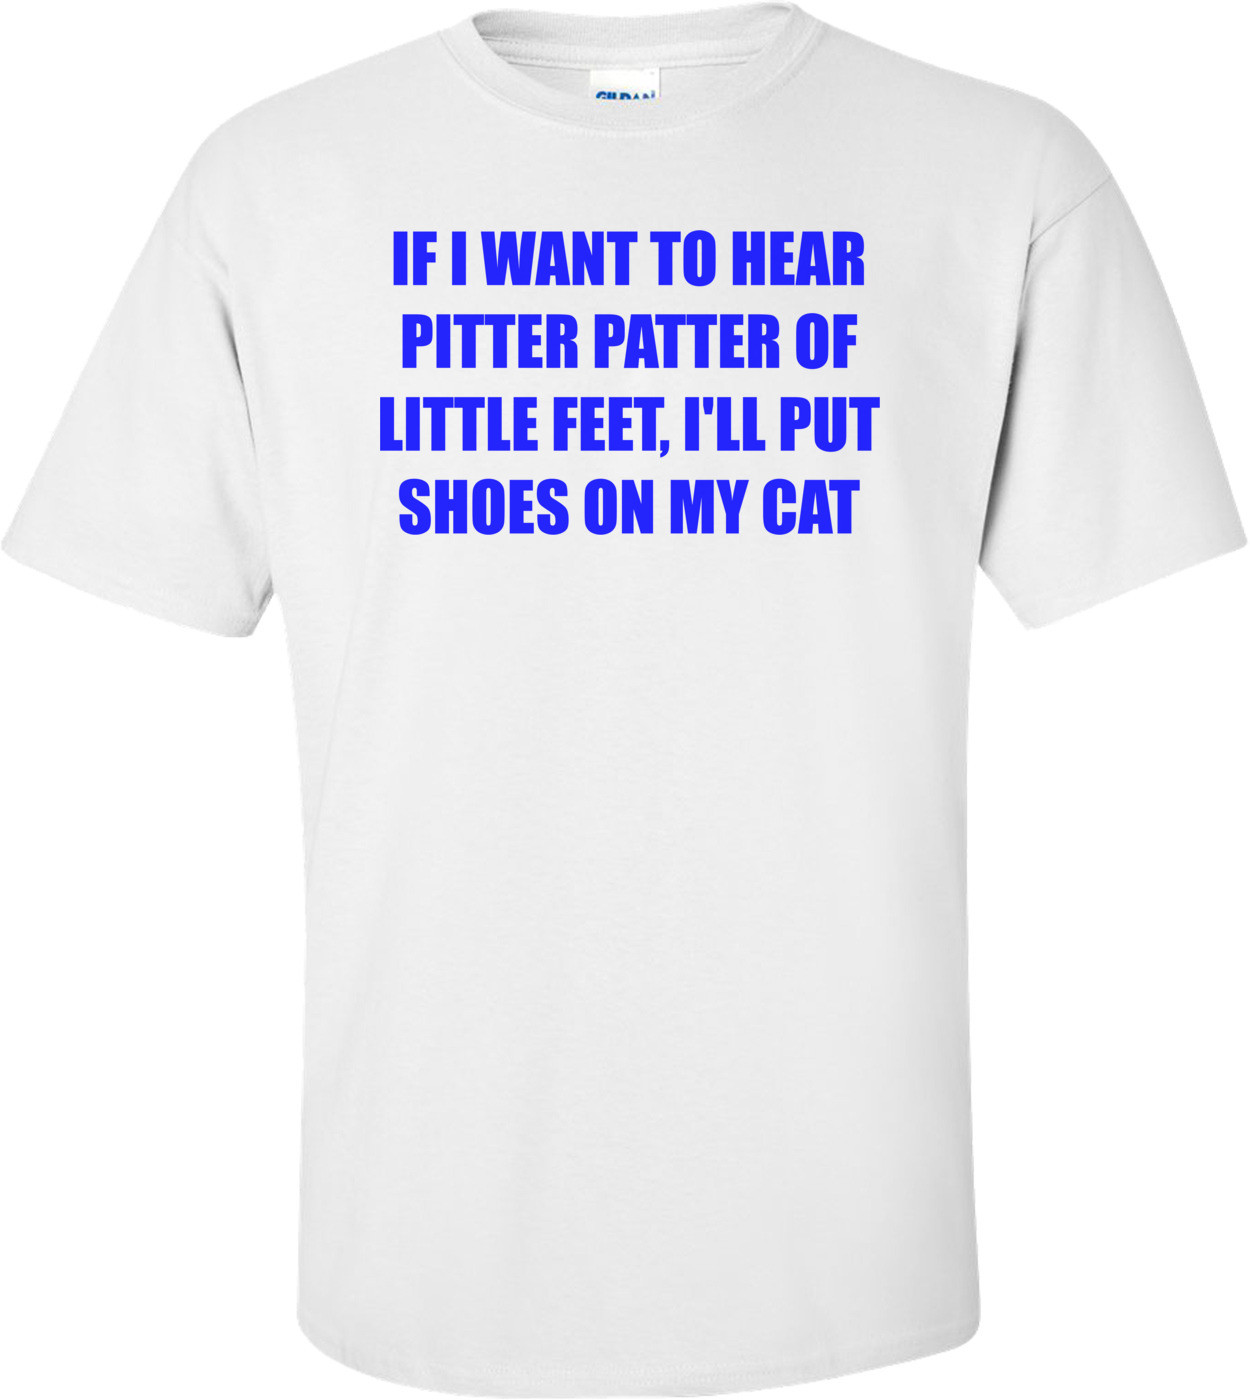 IF I WANT TO HEAR PITTER PATTER OF LITTLE FEET, I'LL PUT SHOES ON MY CAT